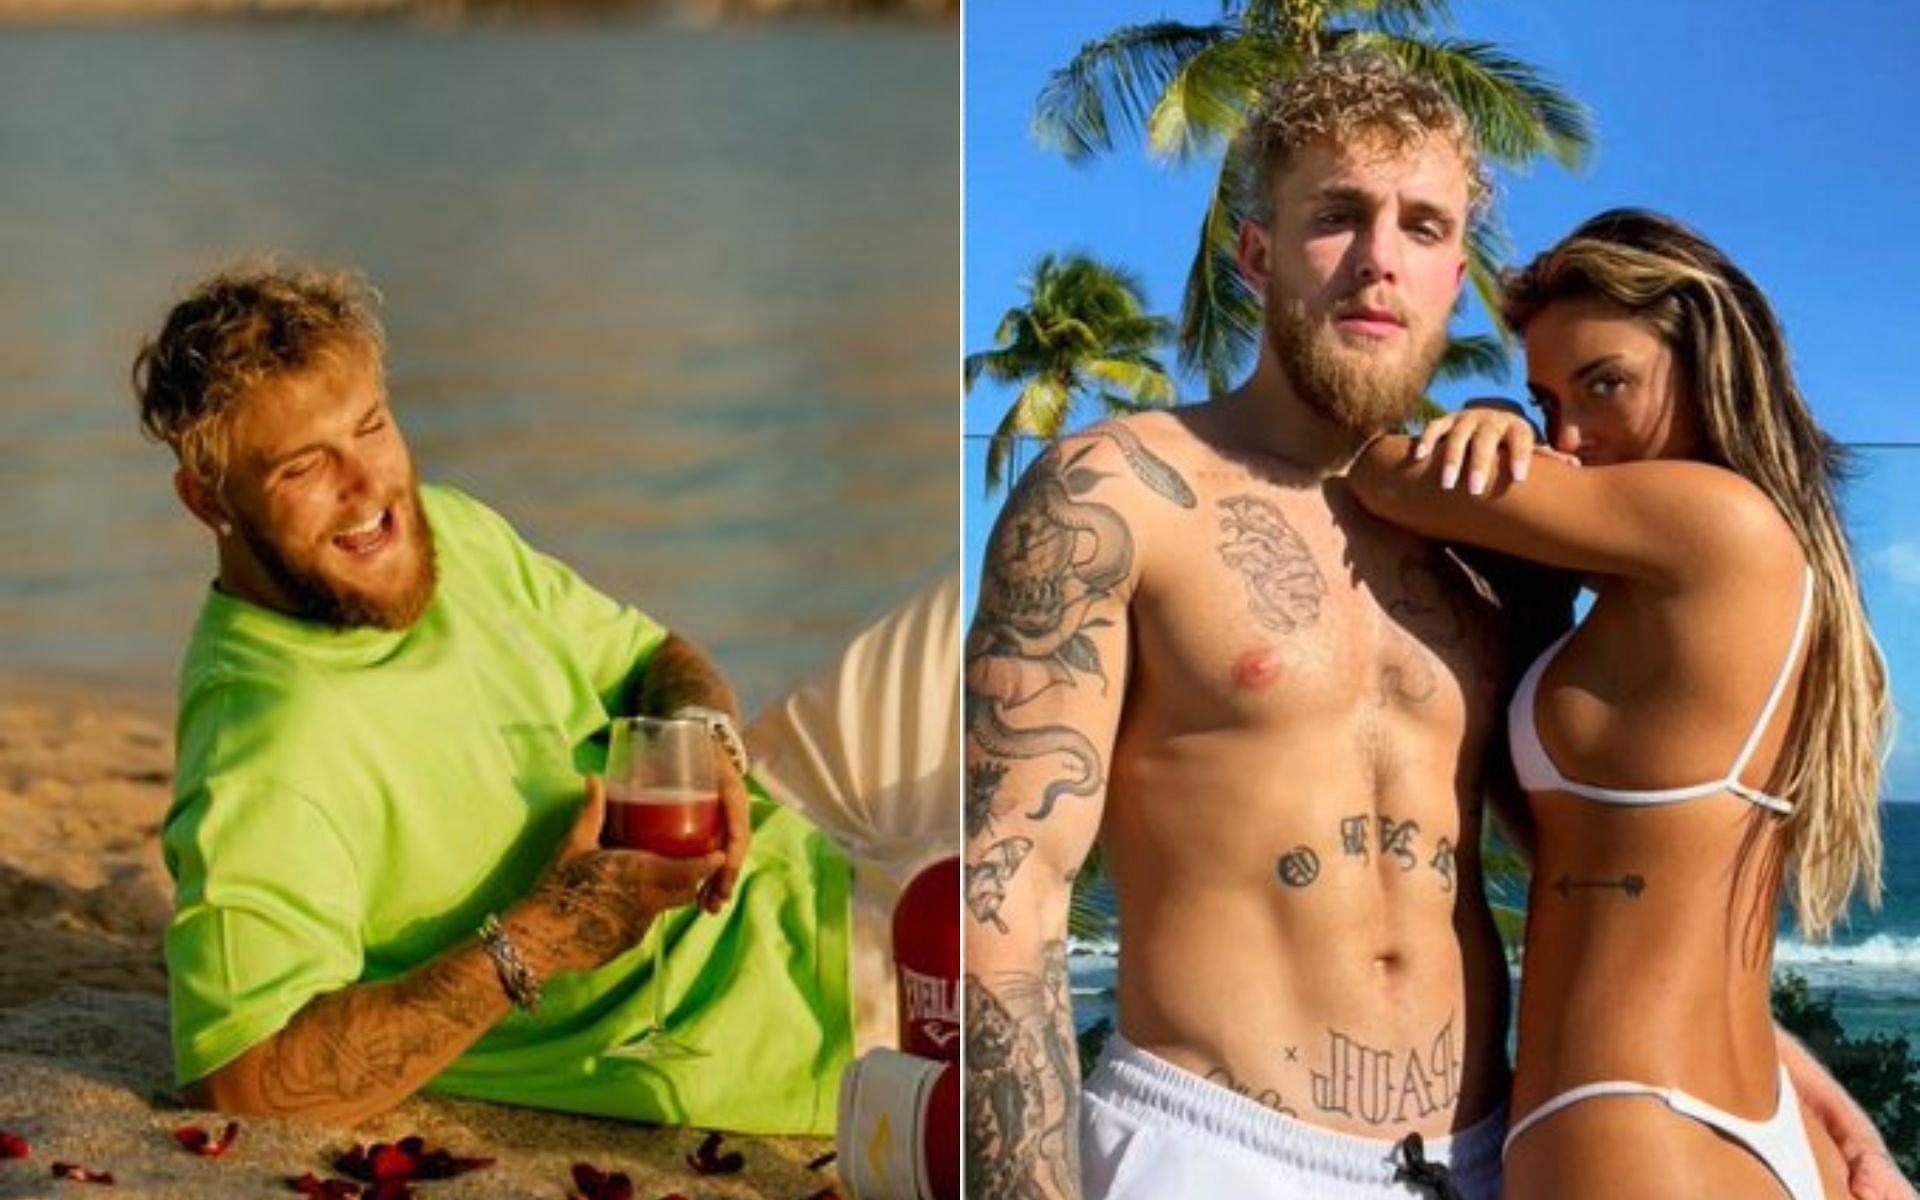 Jake Paul (left) and Jake Paul with Julia Rose (right) (Image credits @nypost and @jakepaul on Twitter)